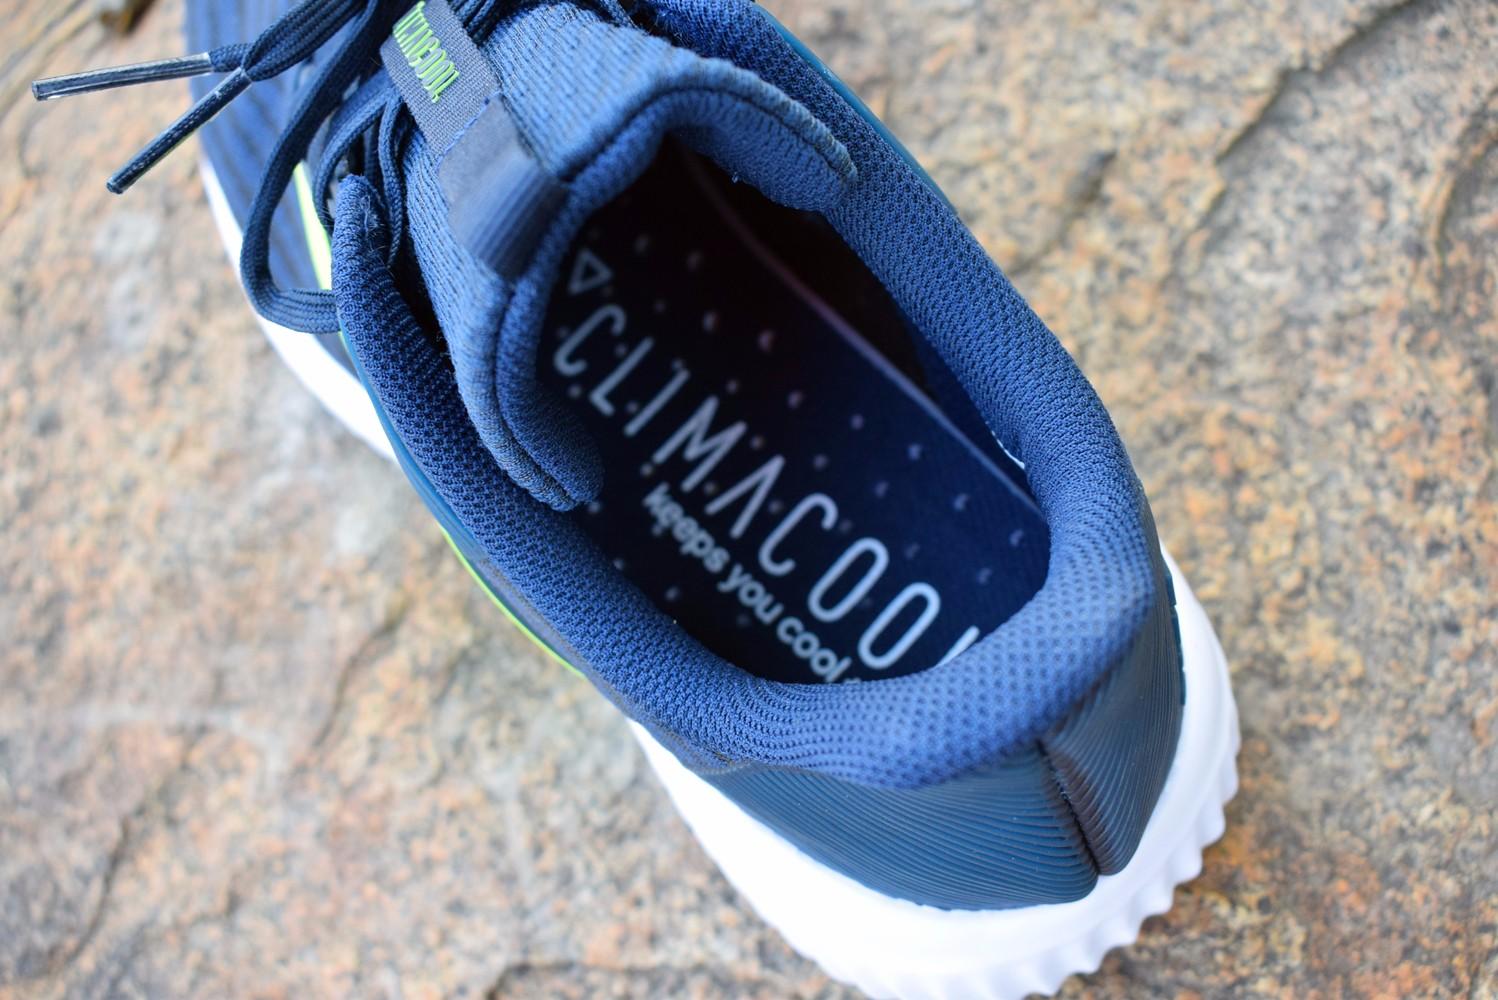 Adidas CLIMACOOL Performance Review – The Sole Line كيراتين بروتين